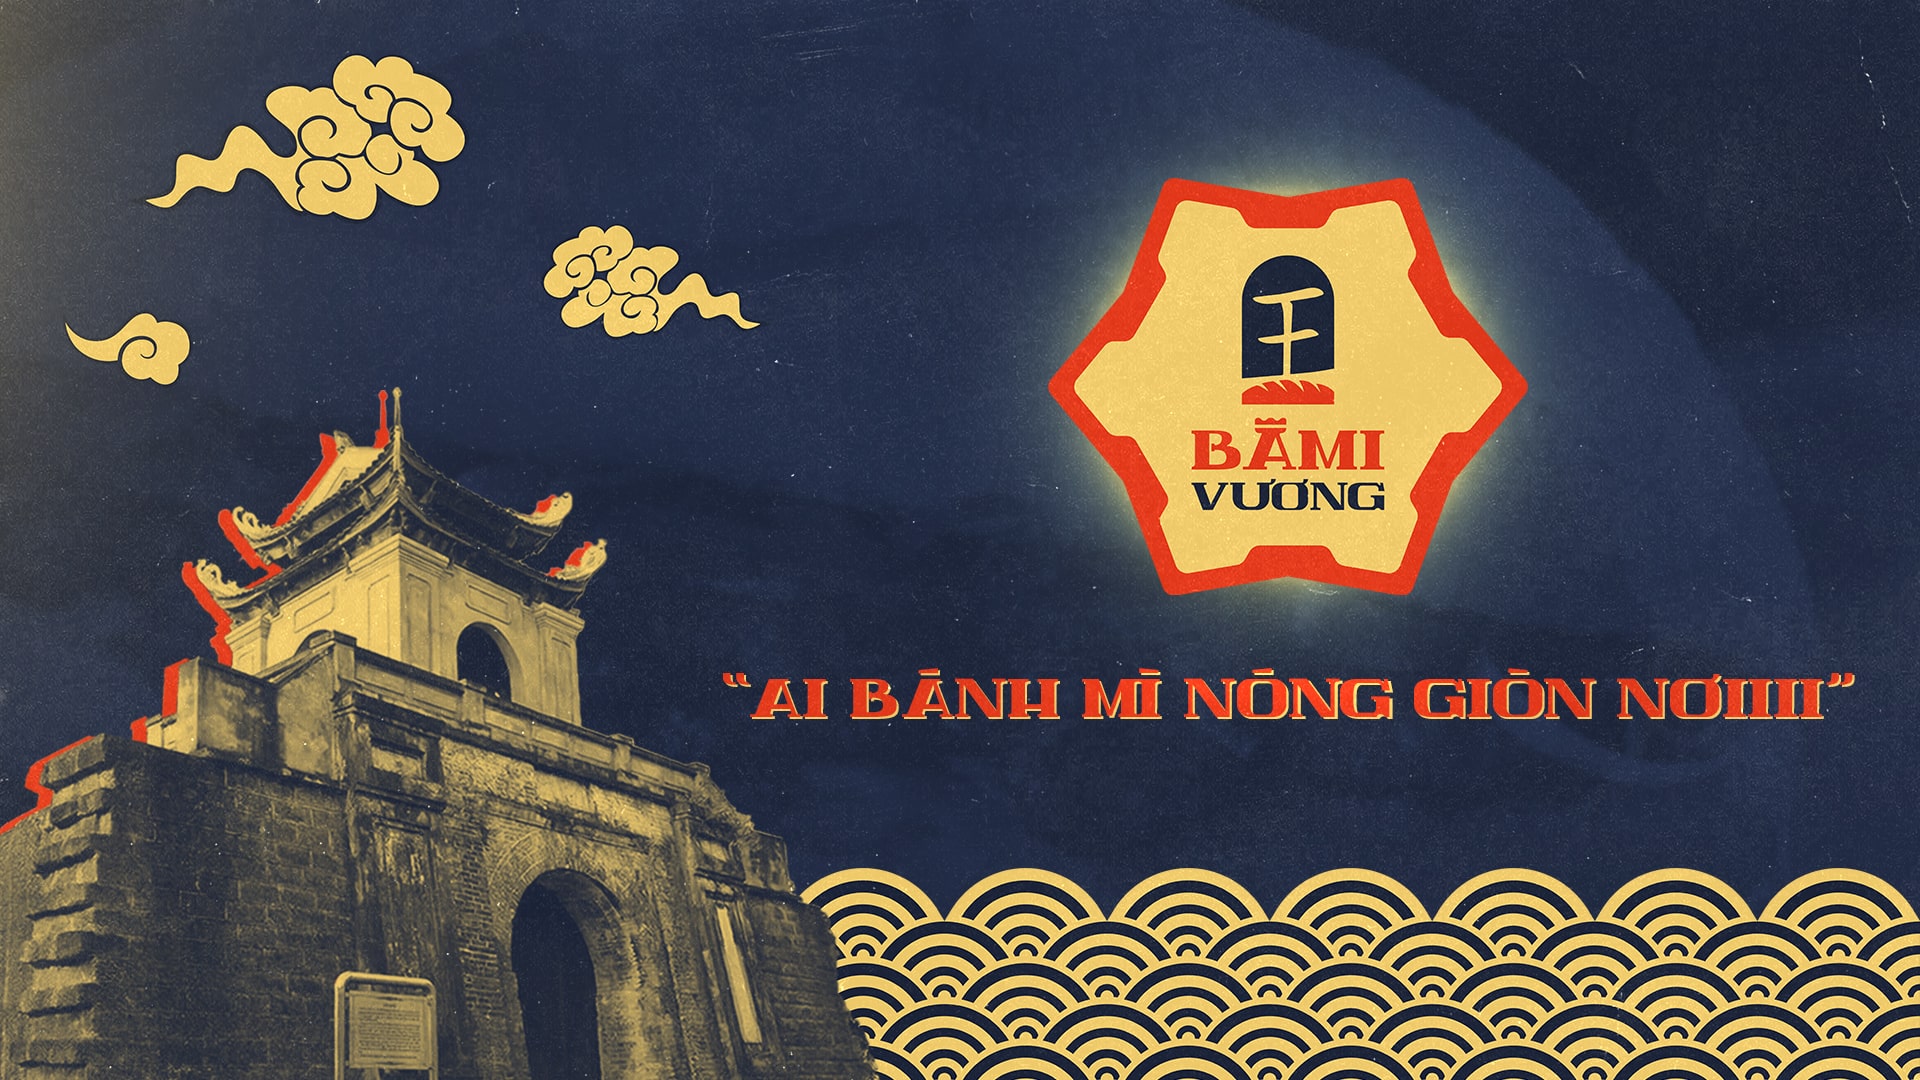 Brand Identity For Bami Vuong by Khac Duc